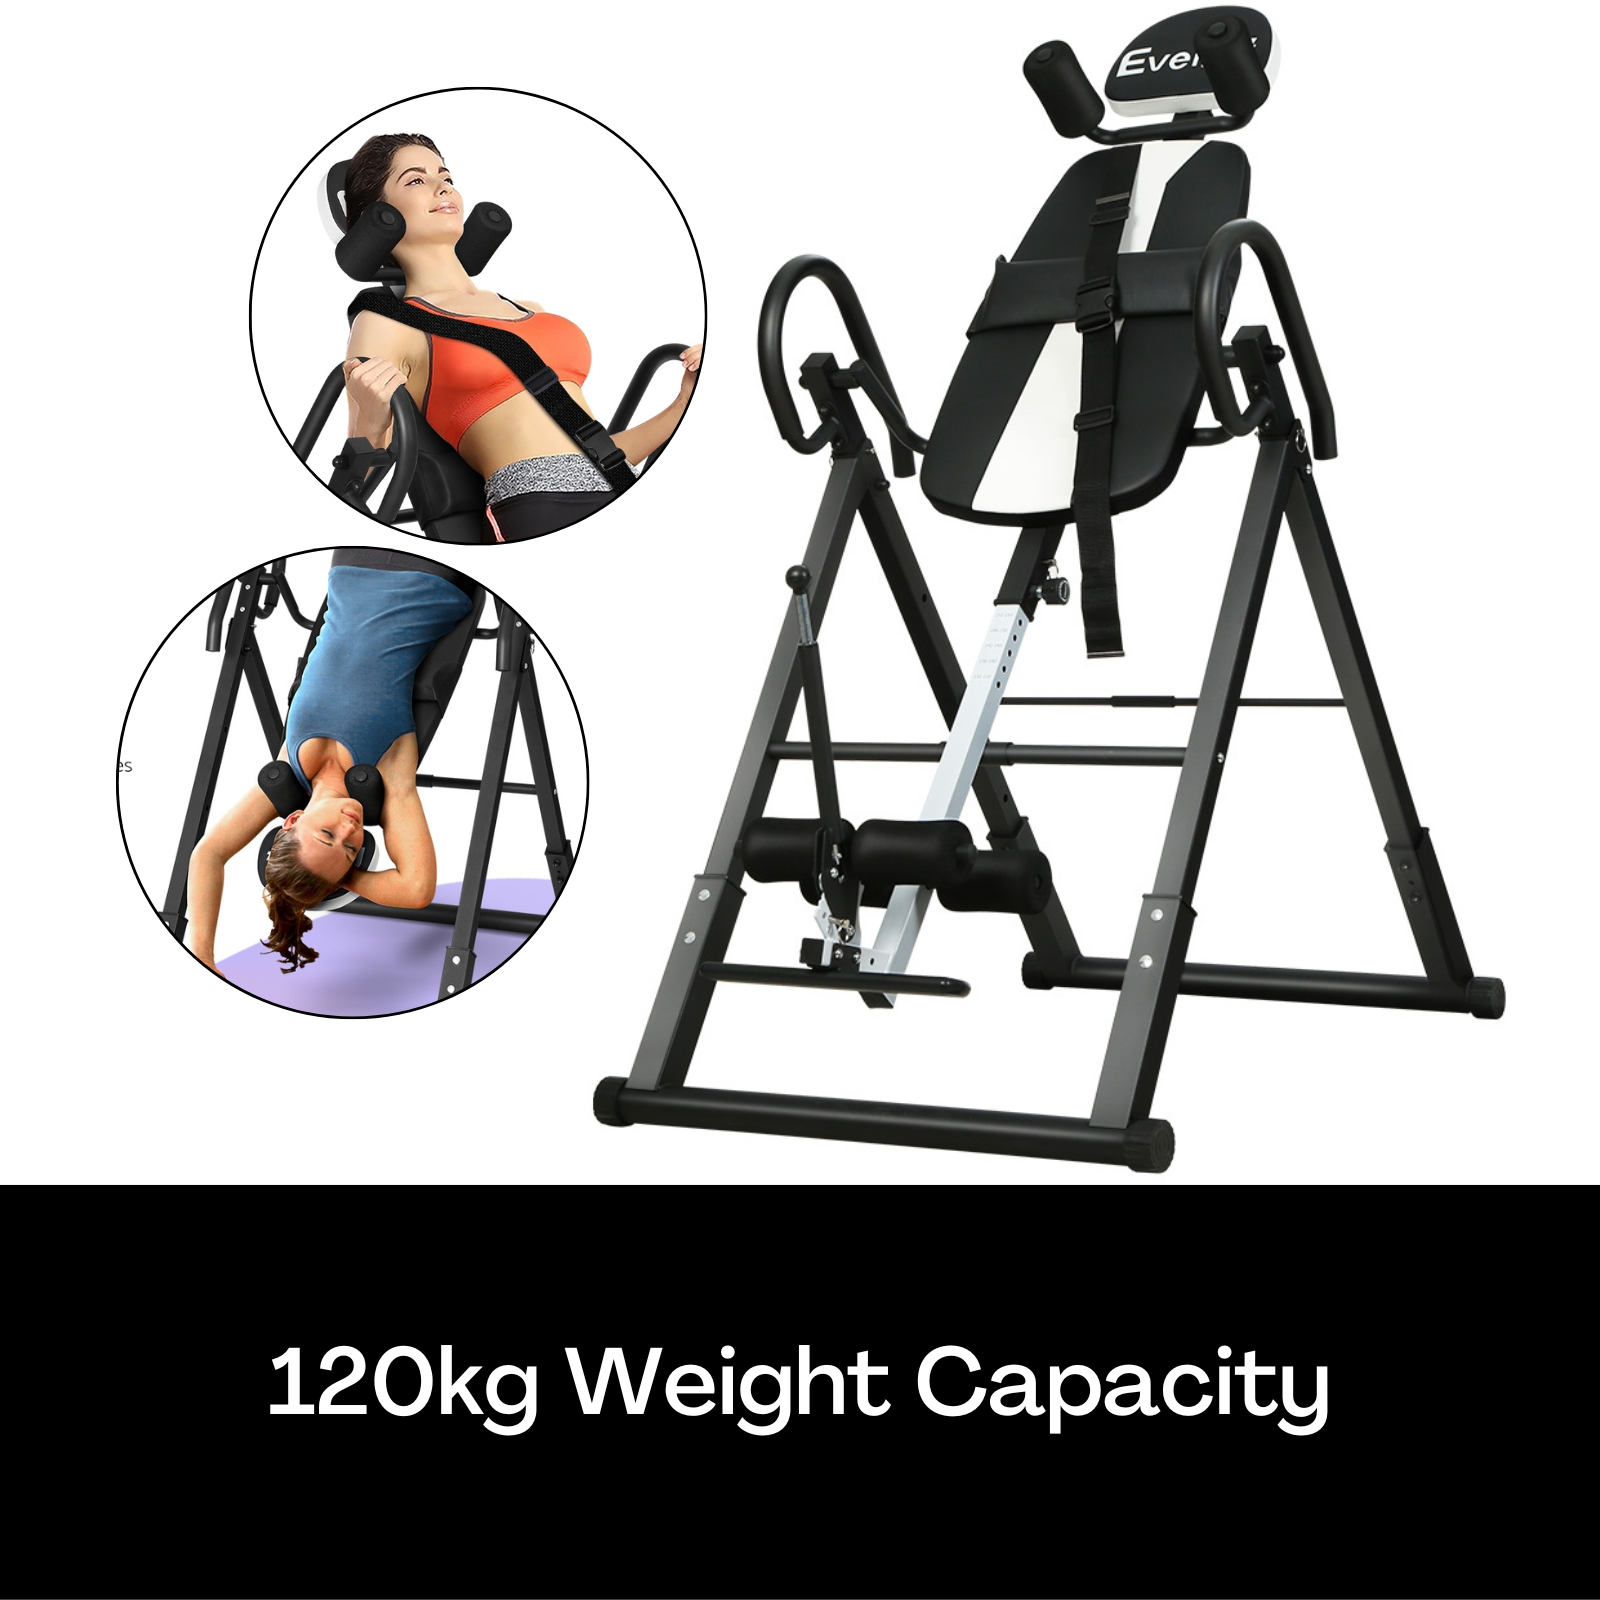 Everfit Inversion Table